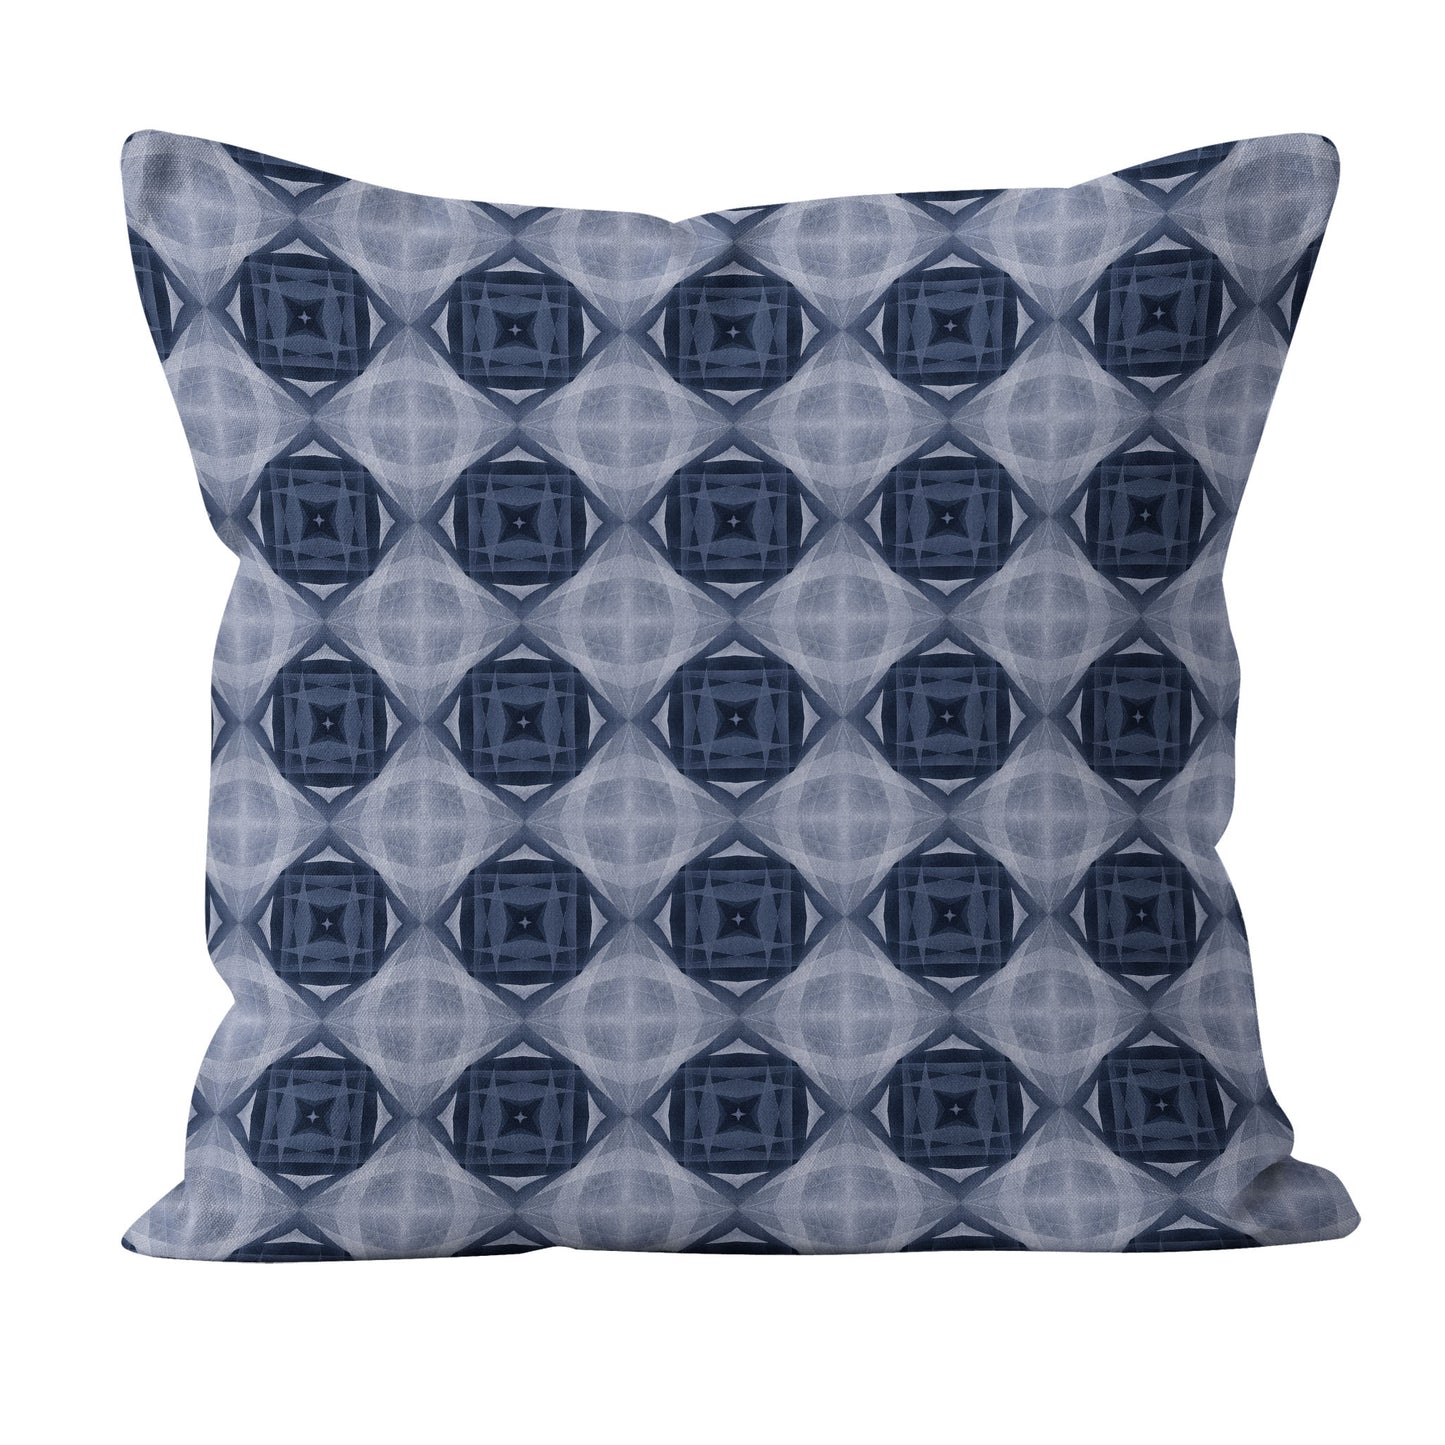 Pillow featuring a blue collage pattern.